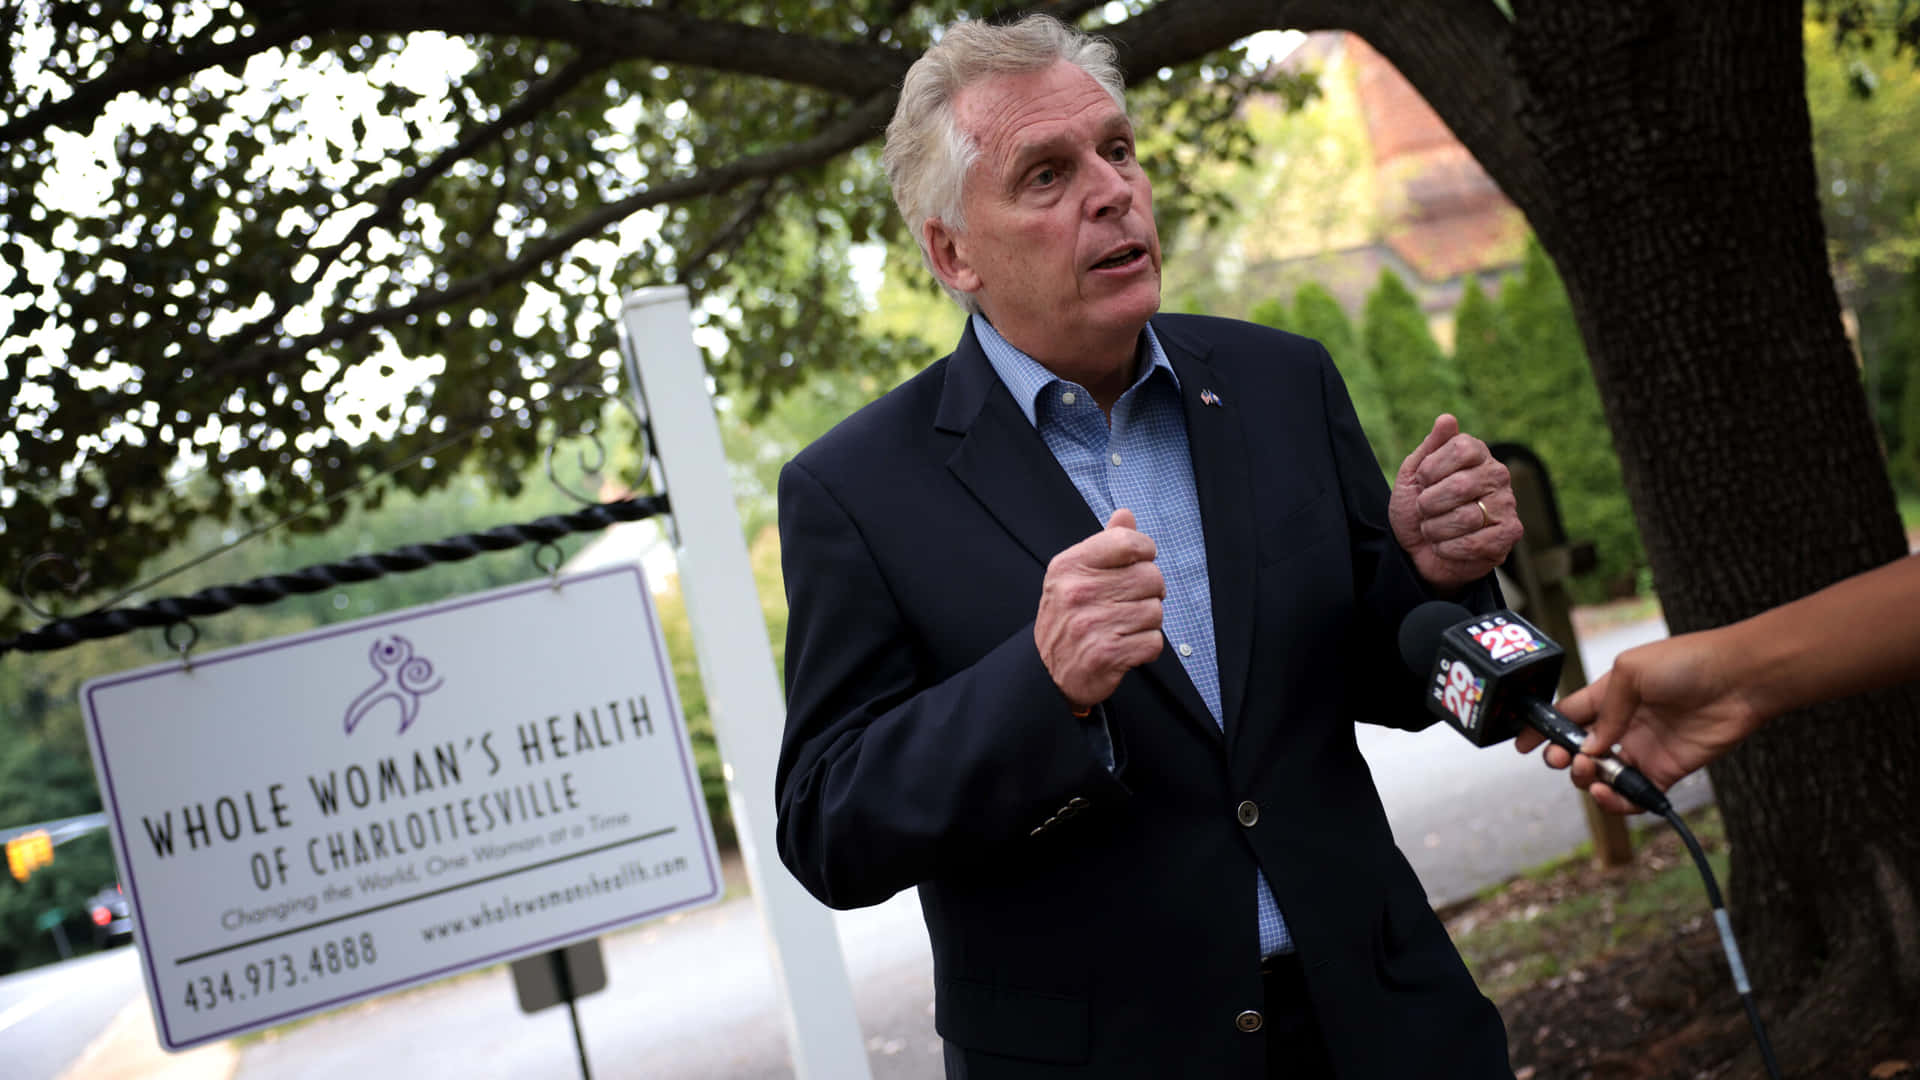 Terry McAuliffe during a visit at the Whole Woman's Health Clinic Wallpaper